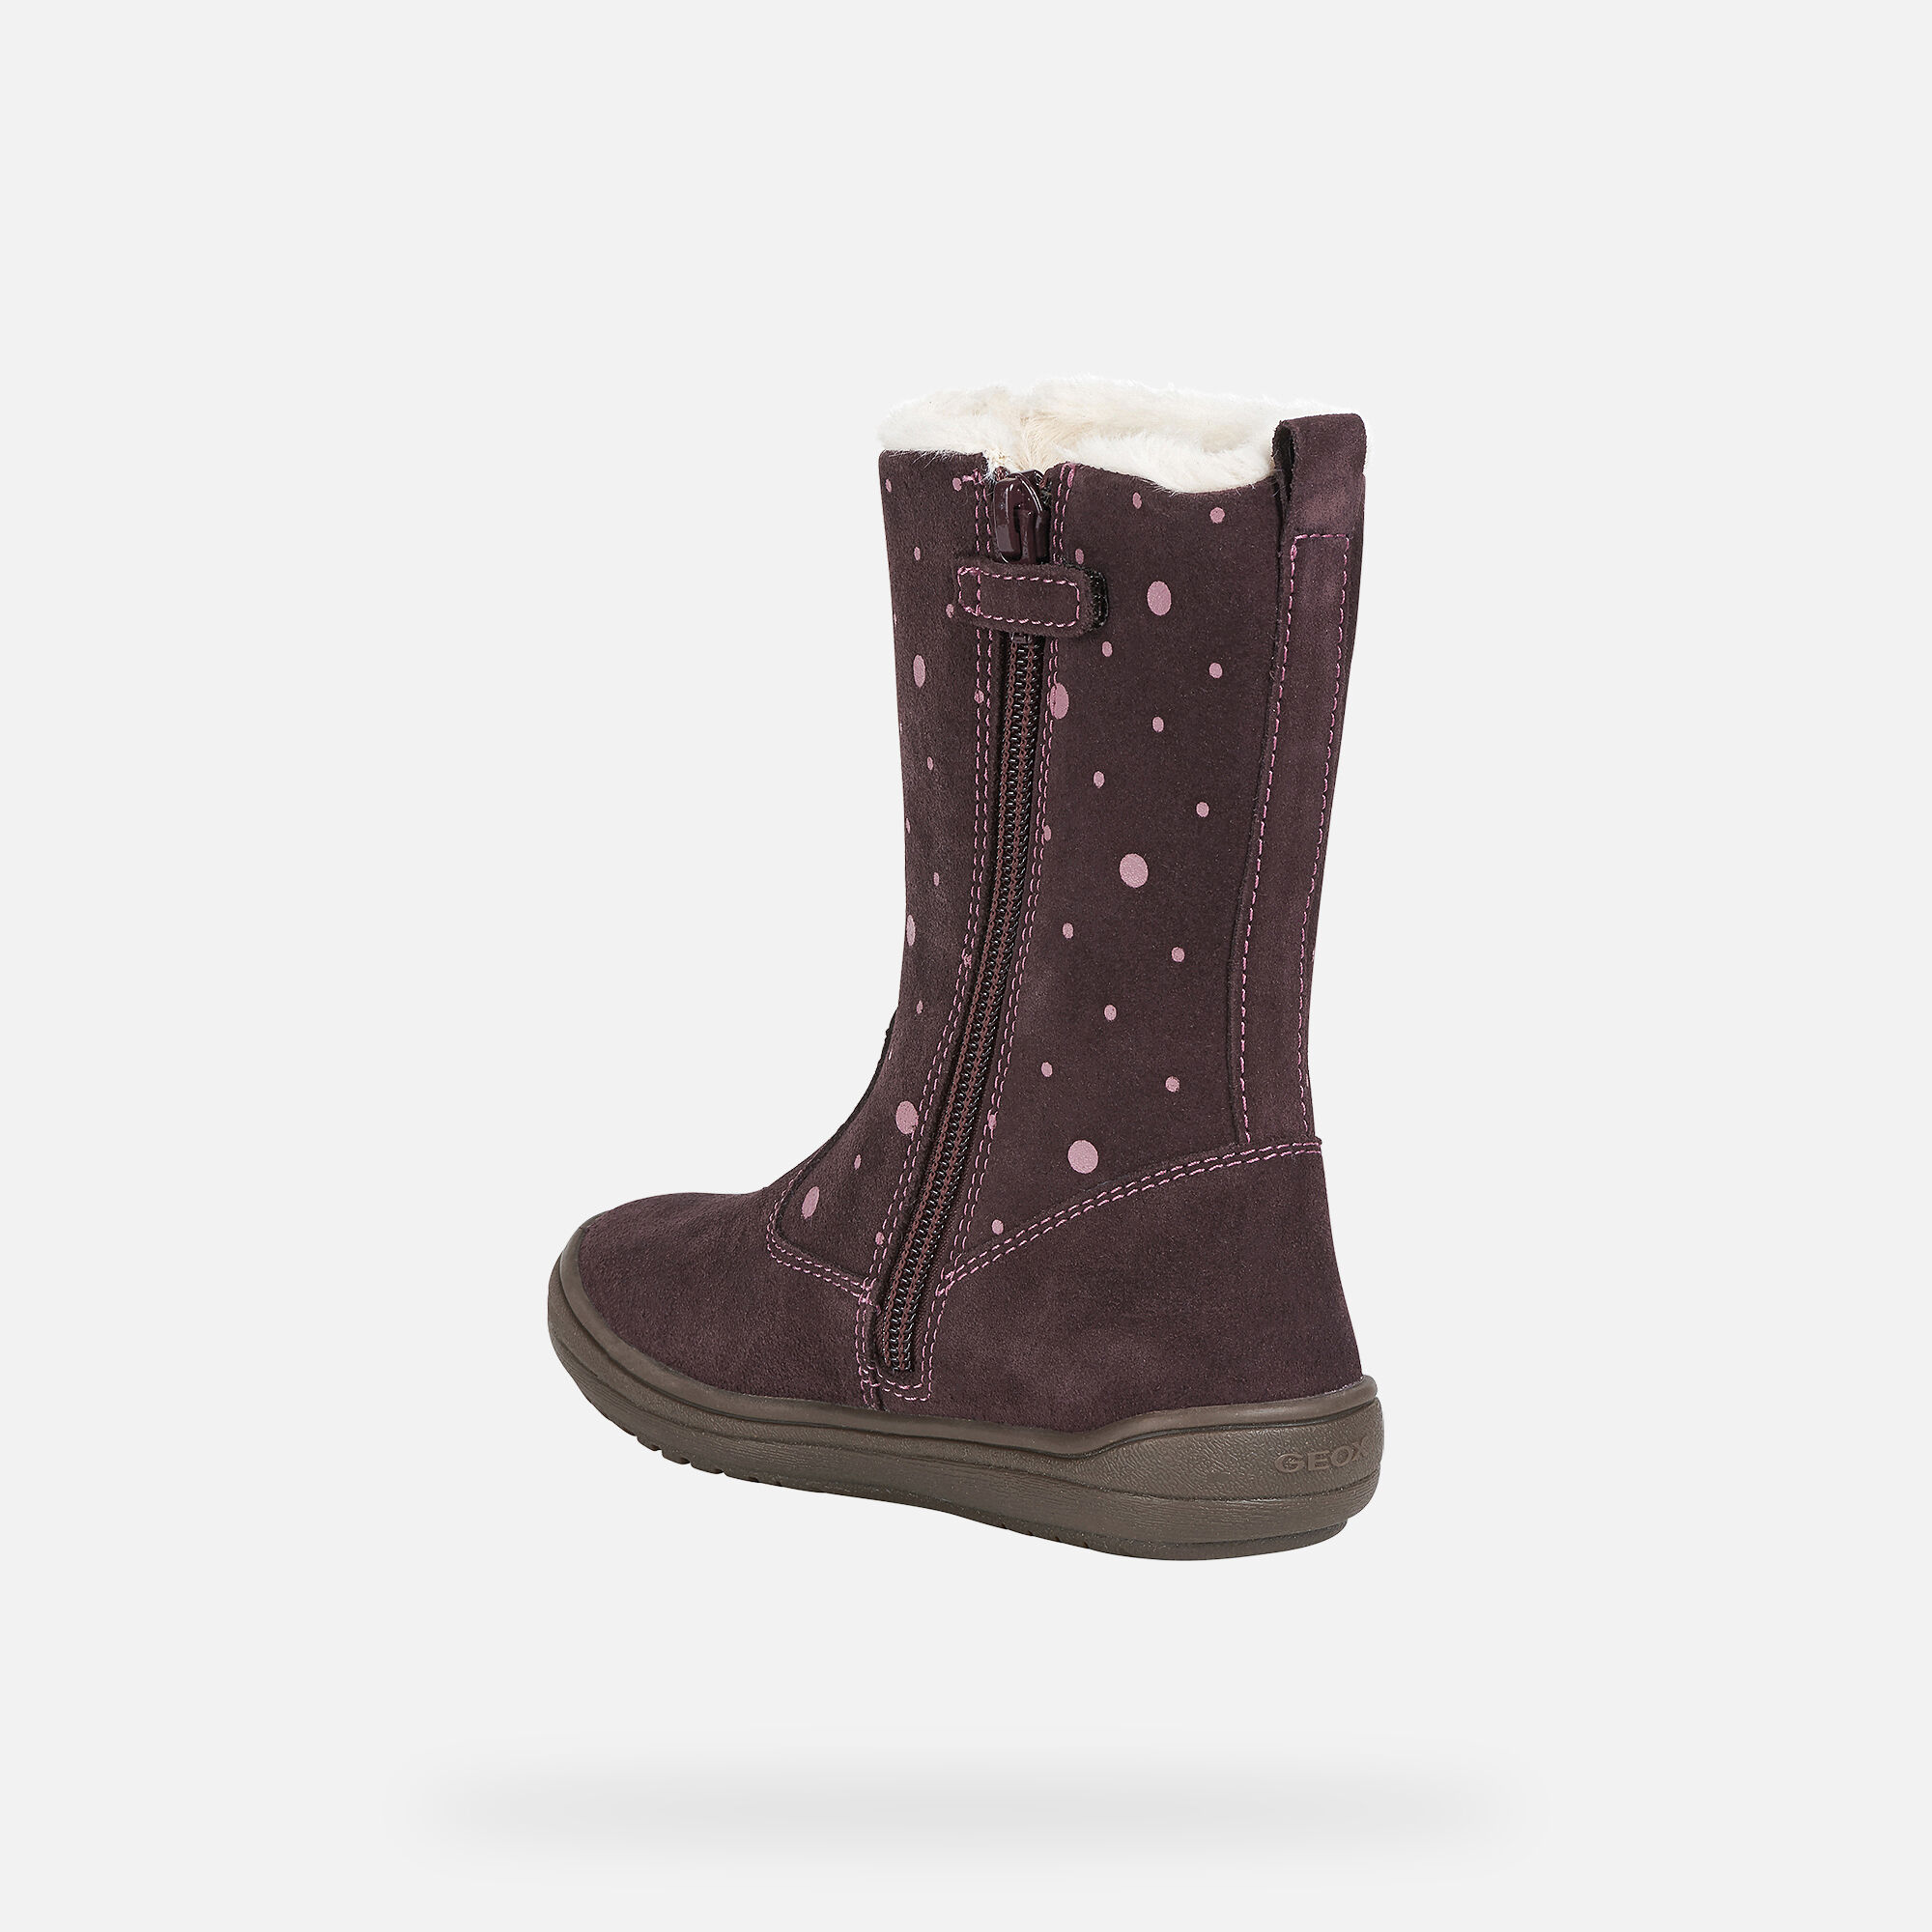 HADRIEL WPF GIRL - BOOTS from girls | Geox